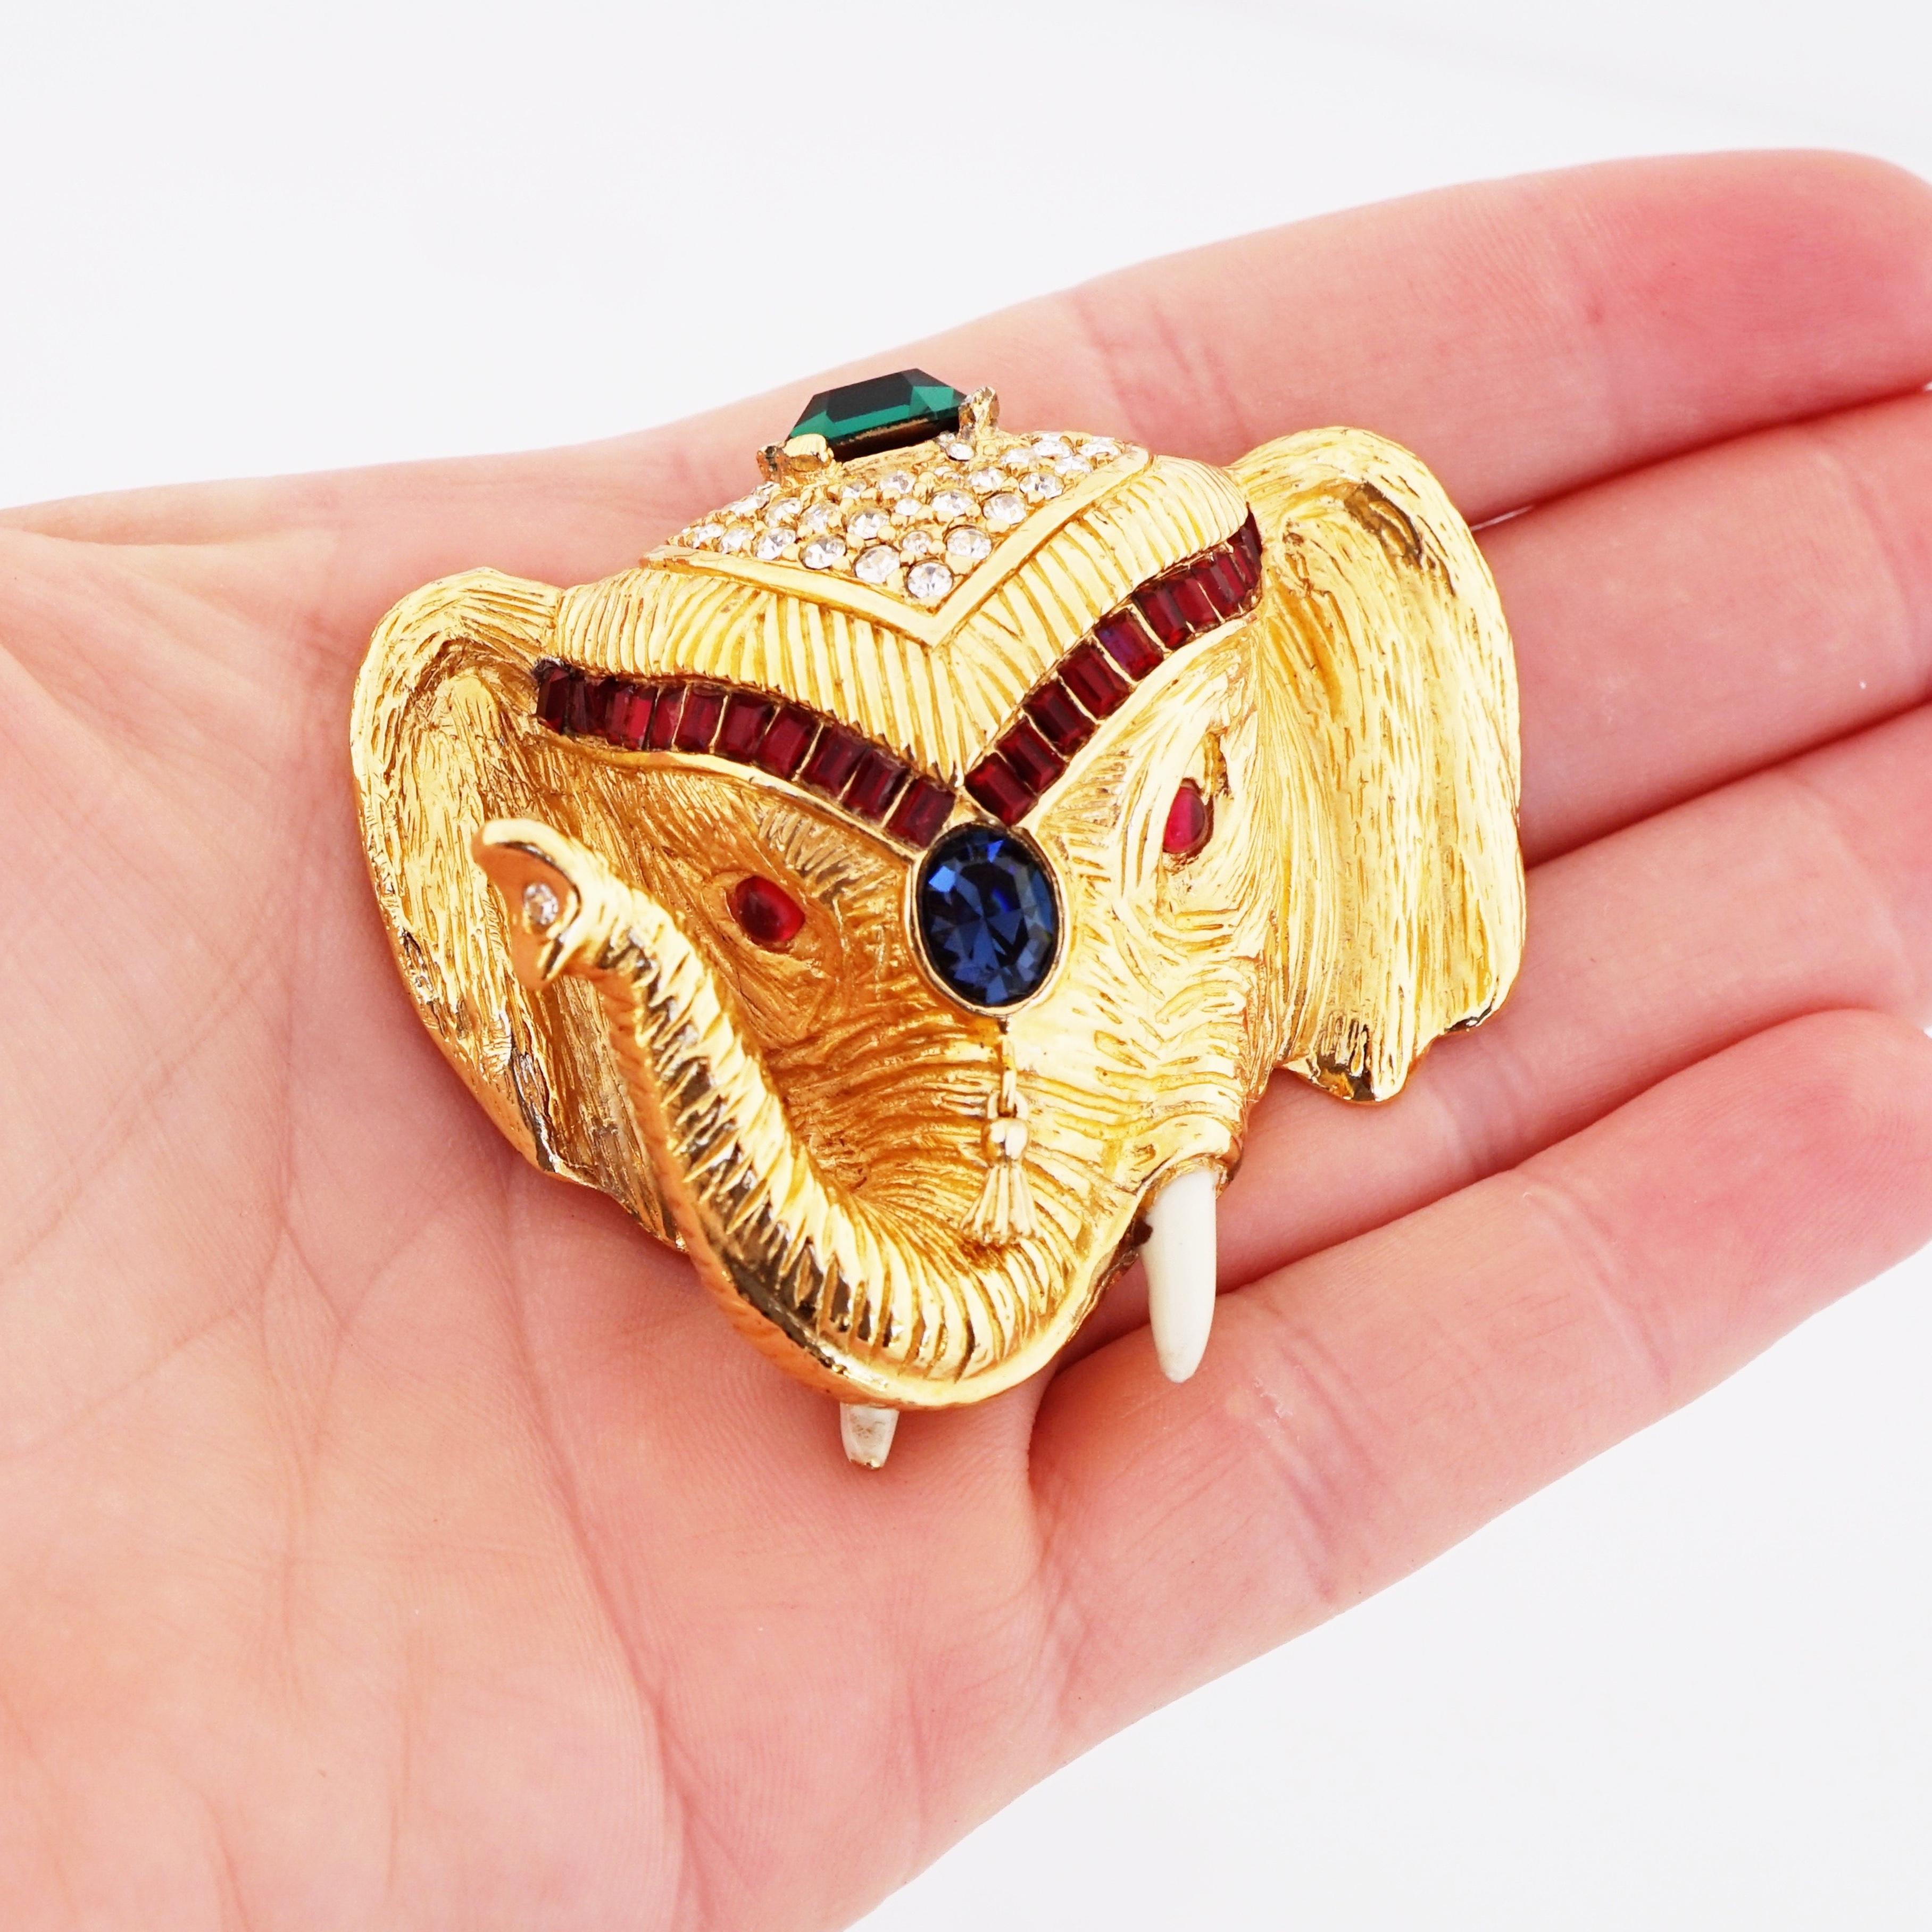 Gilded Elephant Head Brooch With Mughal Jewels By Ciner, 1960s For Sale 2